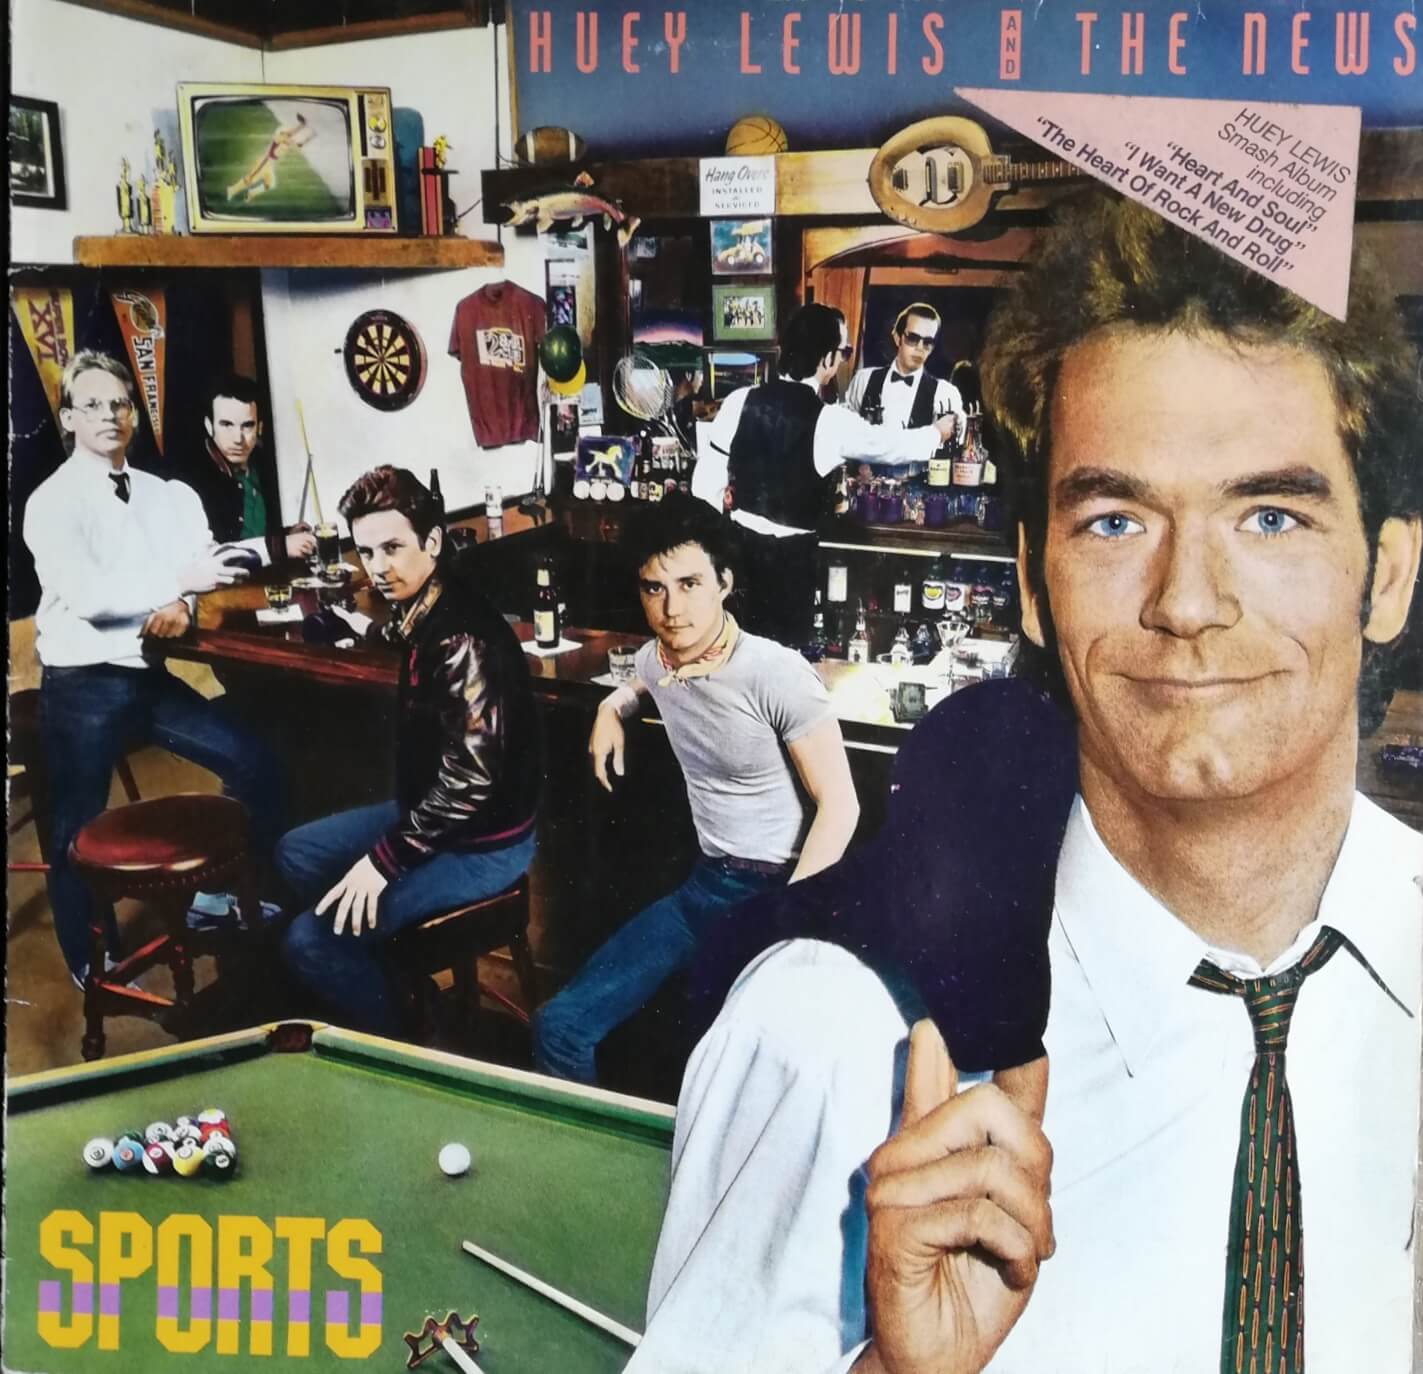 Huey Lewis and the News SPORTS LP